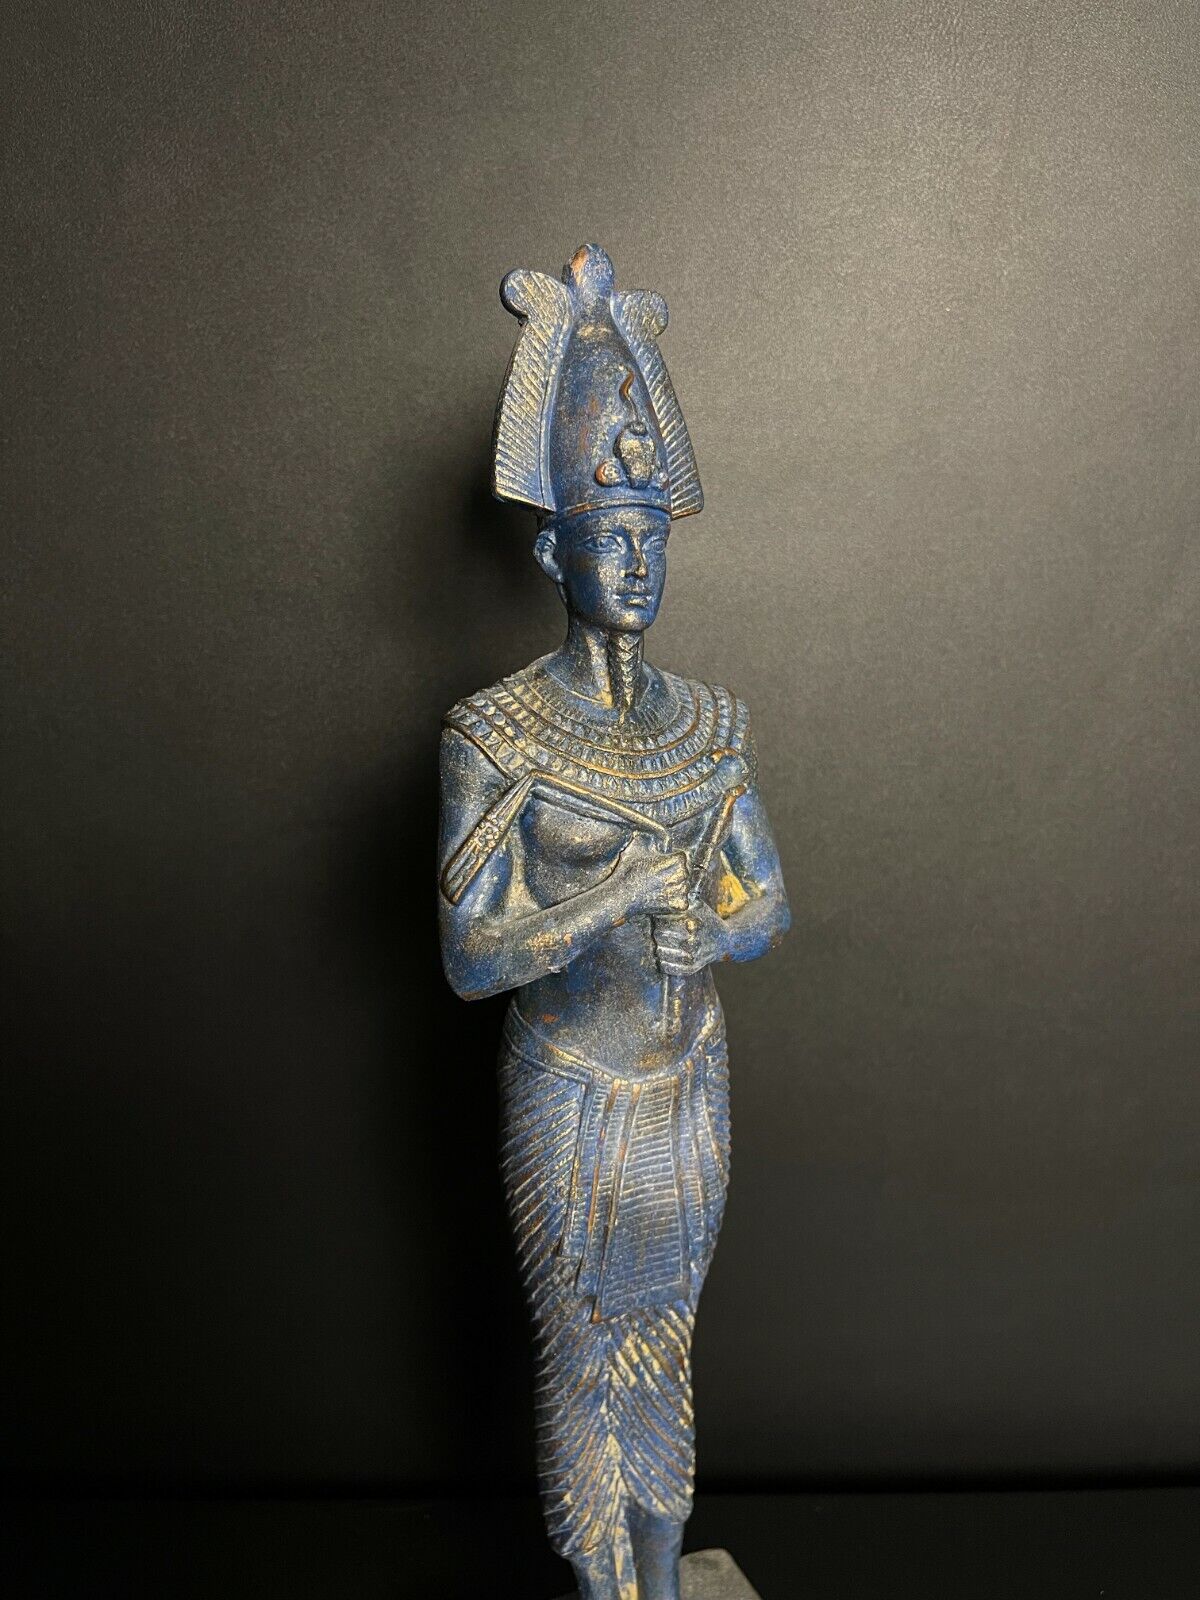 Marvelous Heavy Osiris standing as a décor for your amazing Home